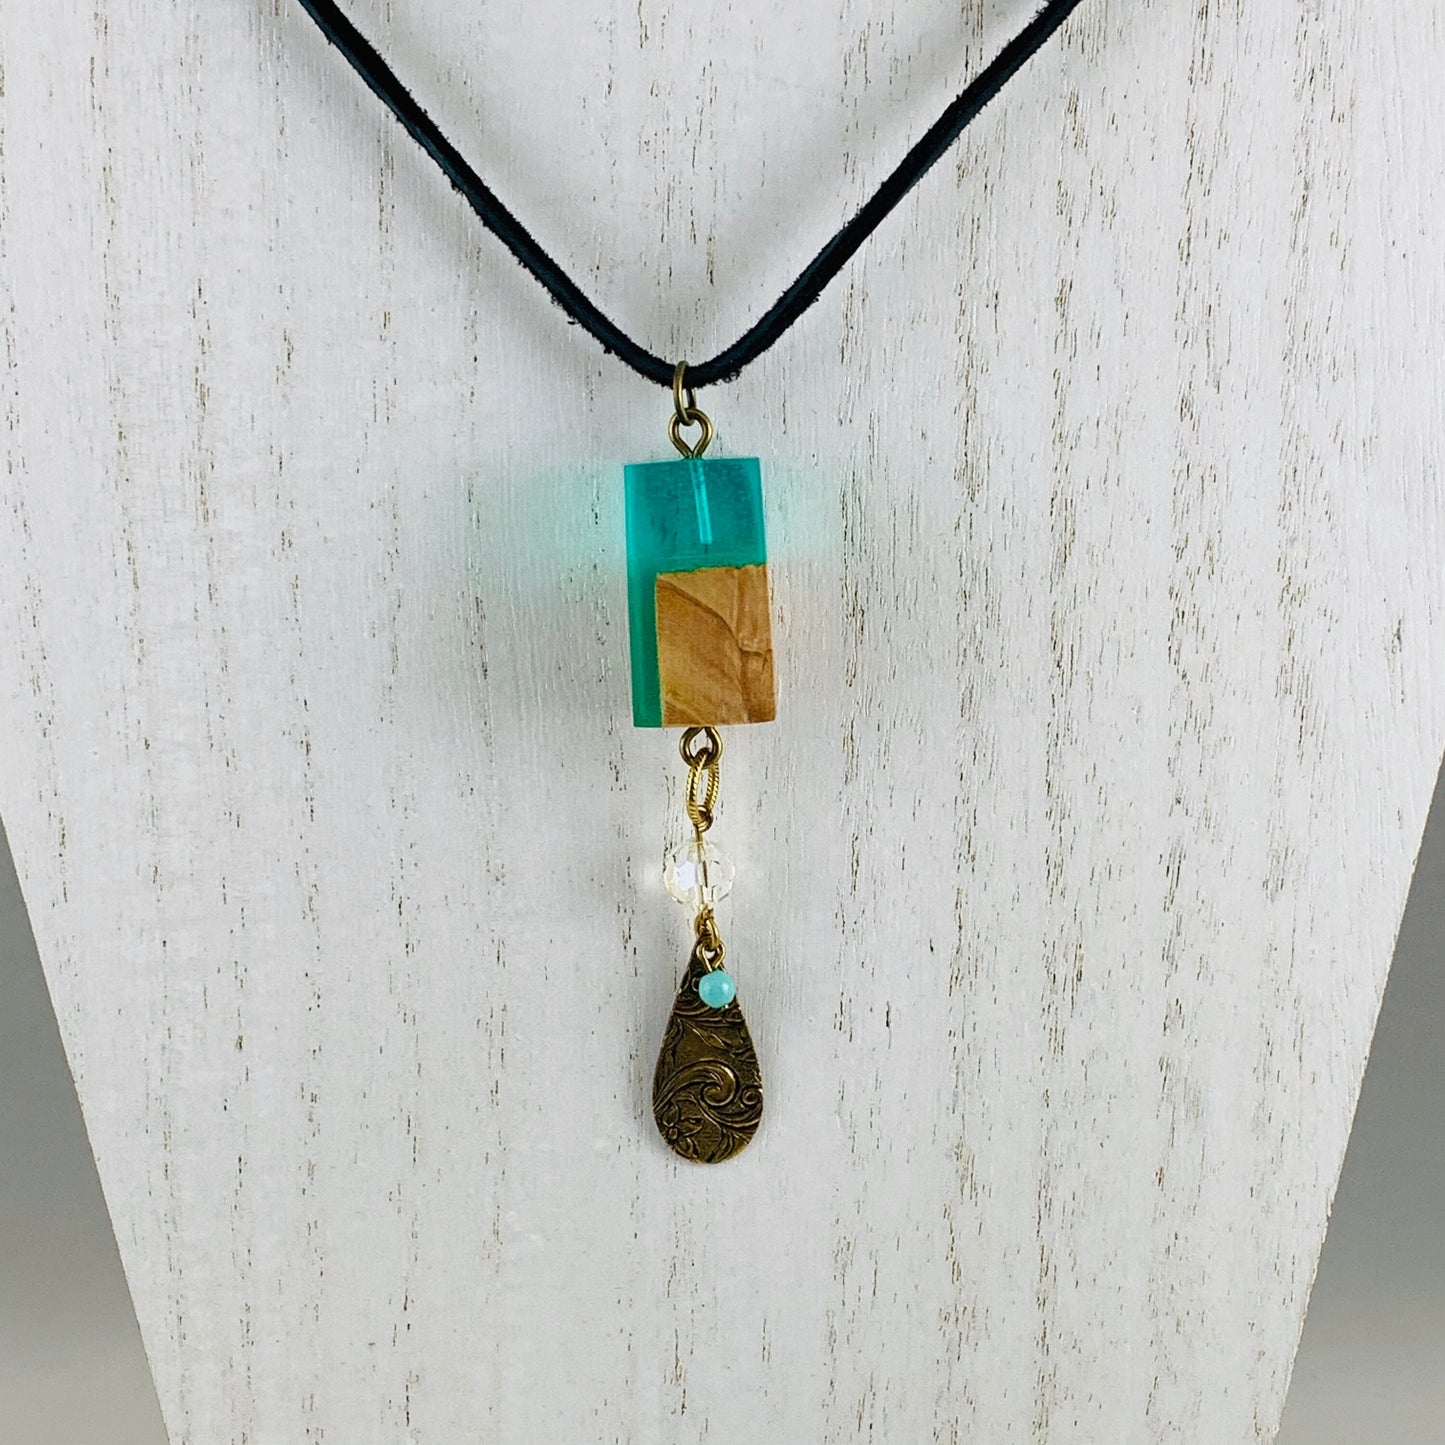 Green  Resin and Wood pendant necklace with crystal bead & teardrop charm with turquoise colored glass bead